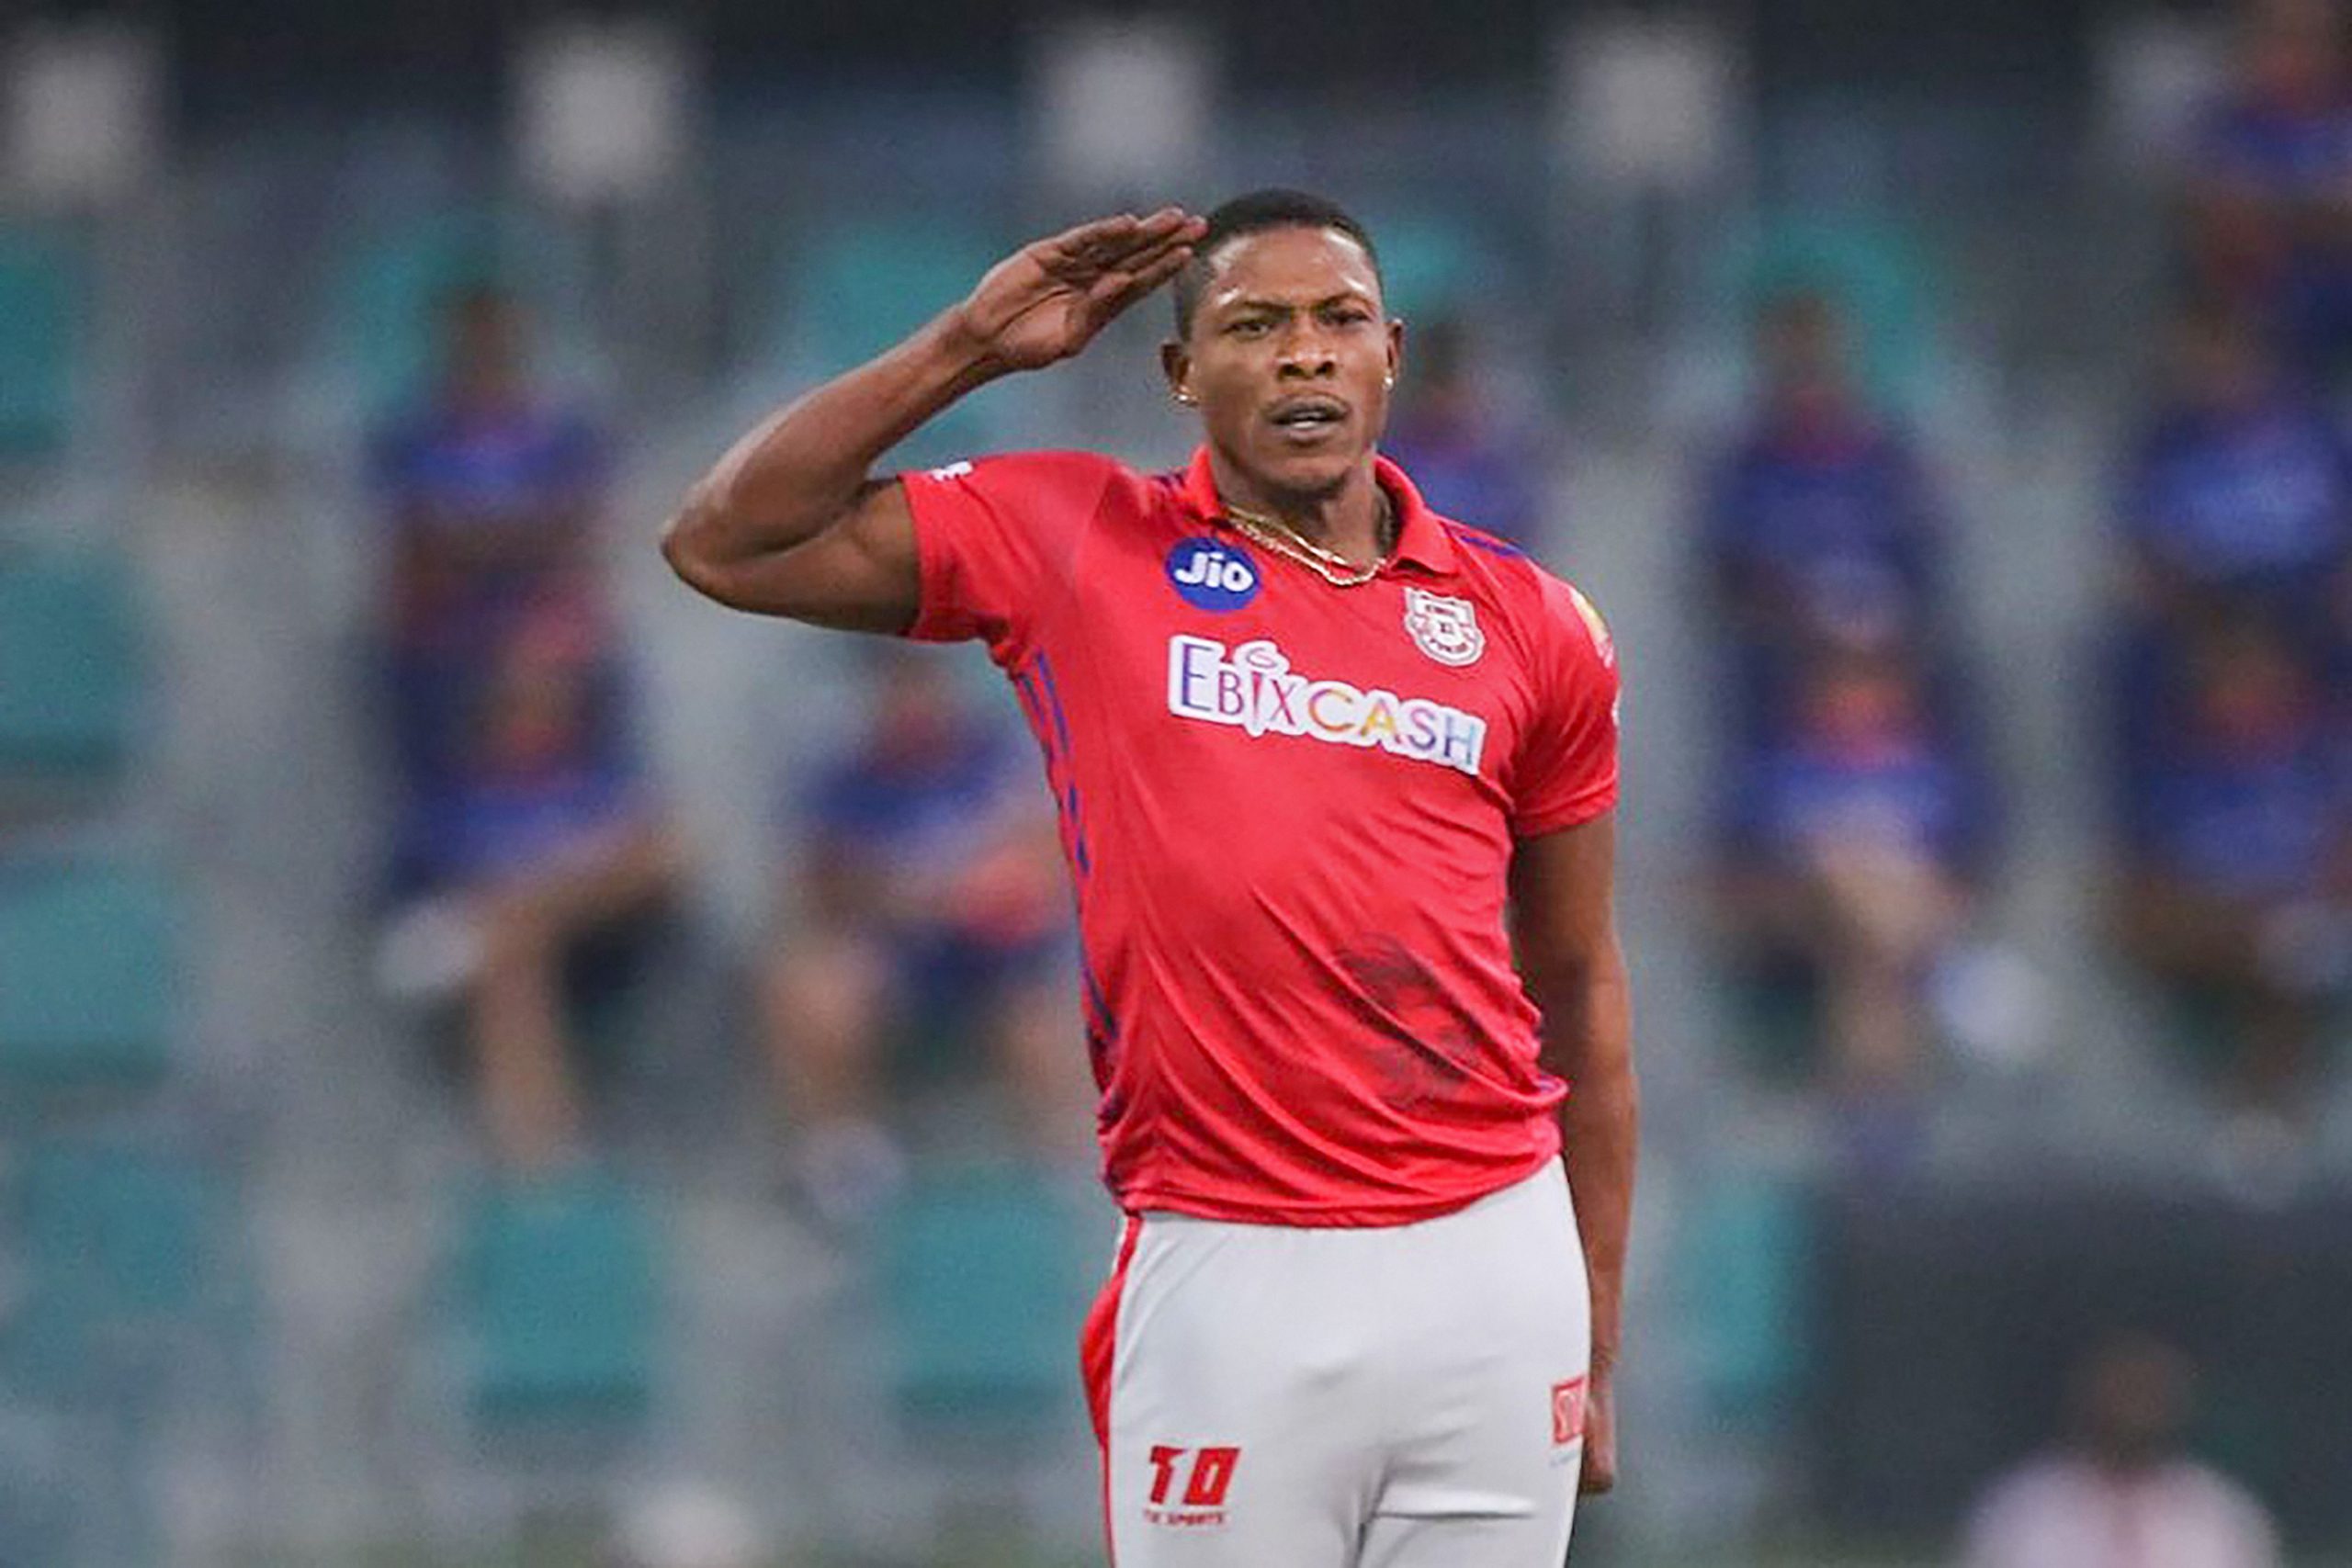 Who is Sheldon Cottrell?